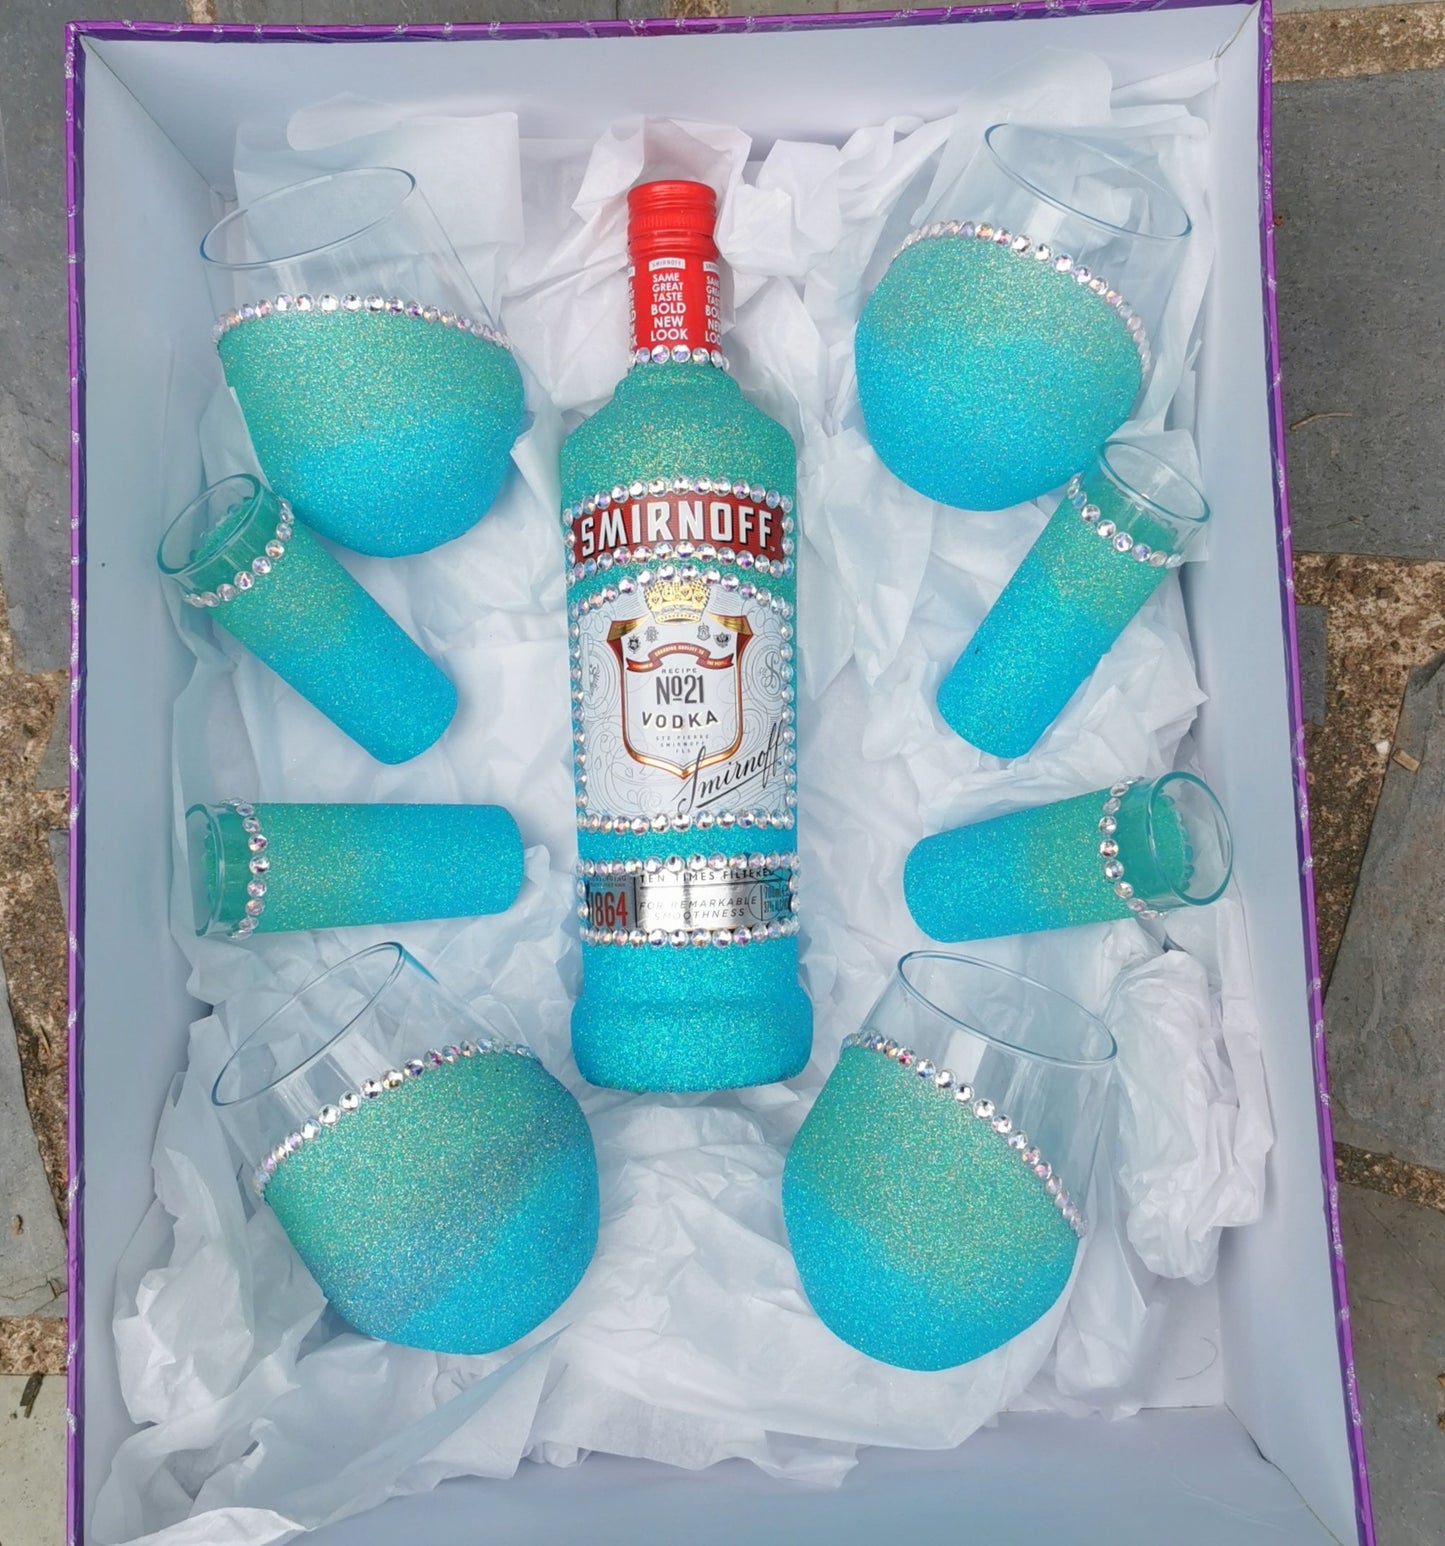 smirnoff set with 4xshot and 4x stemless glasses